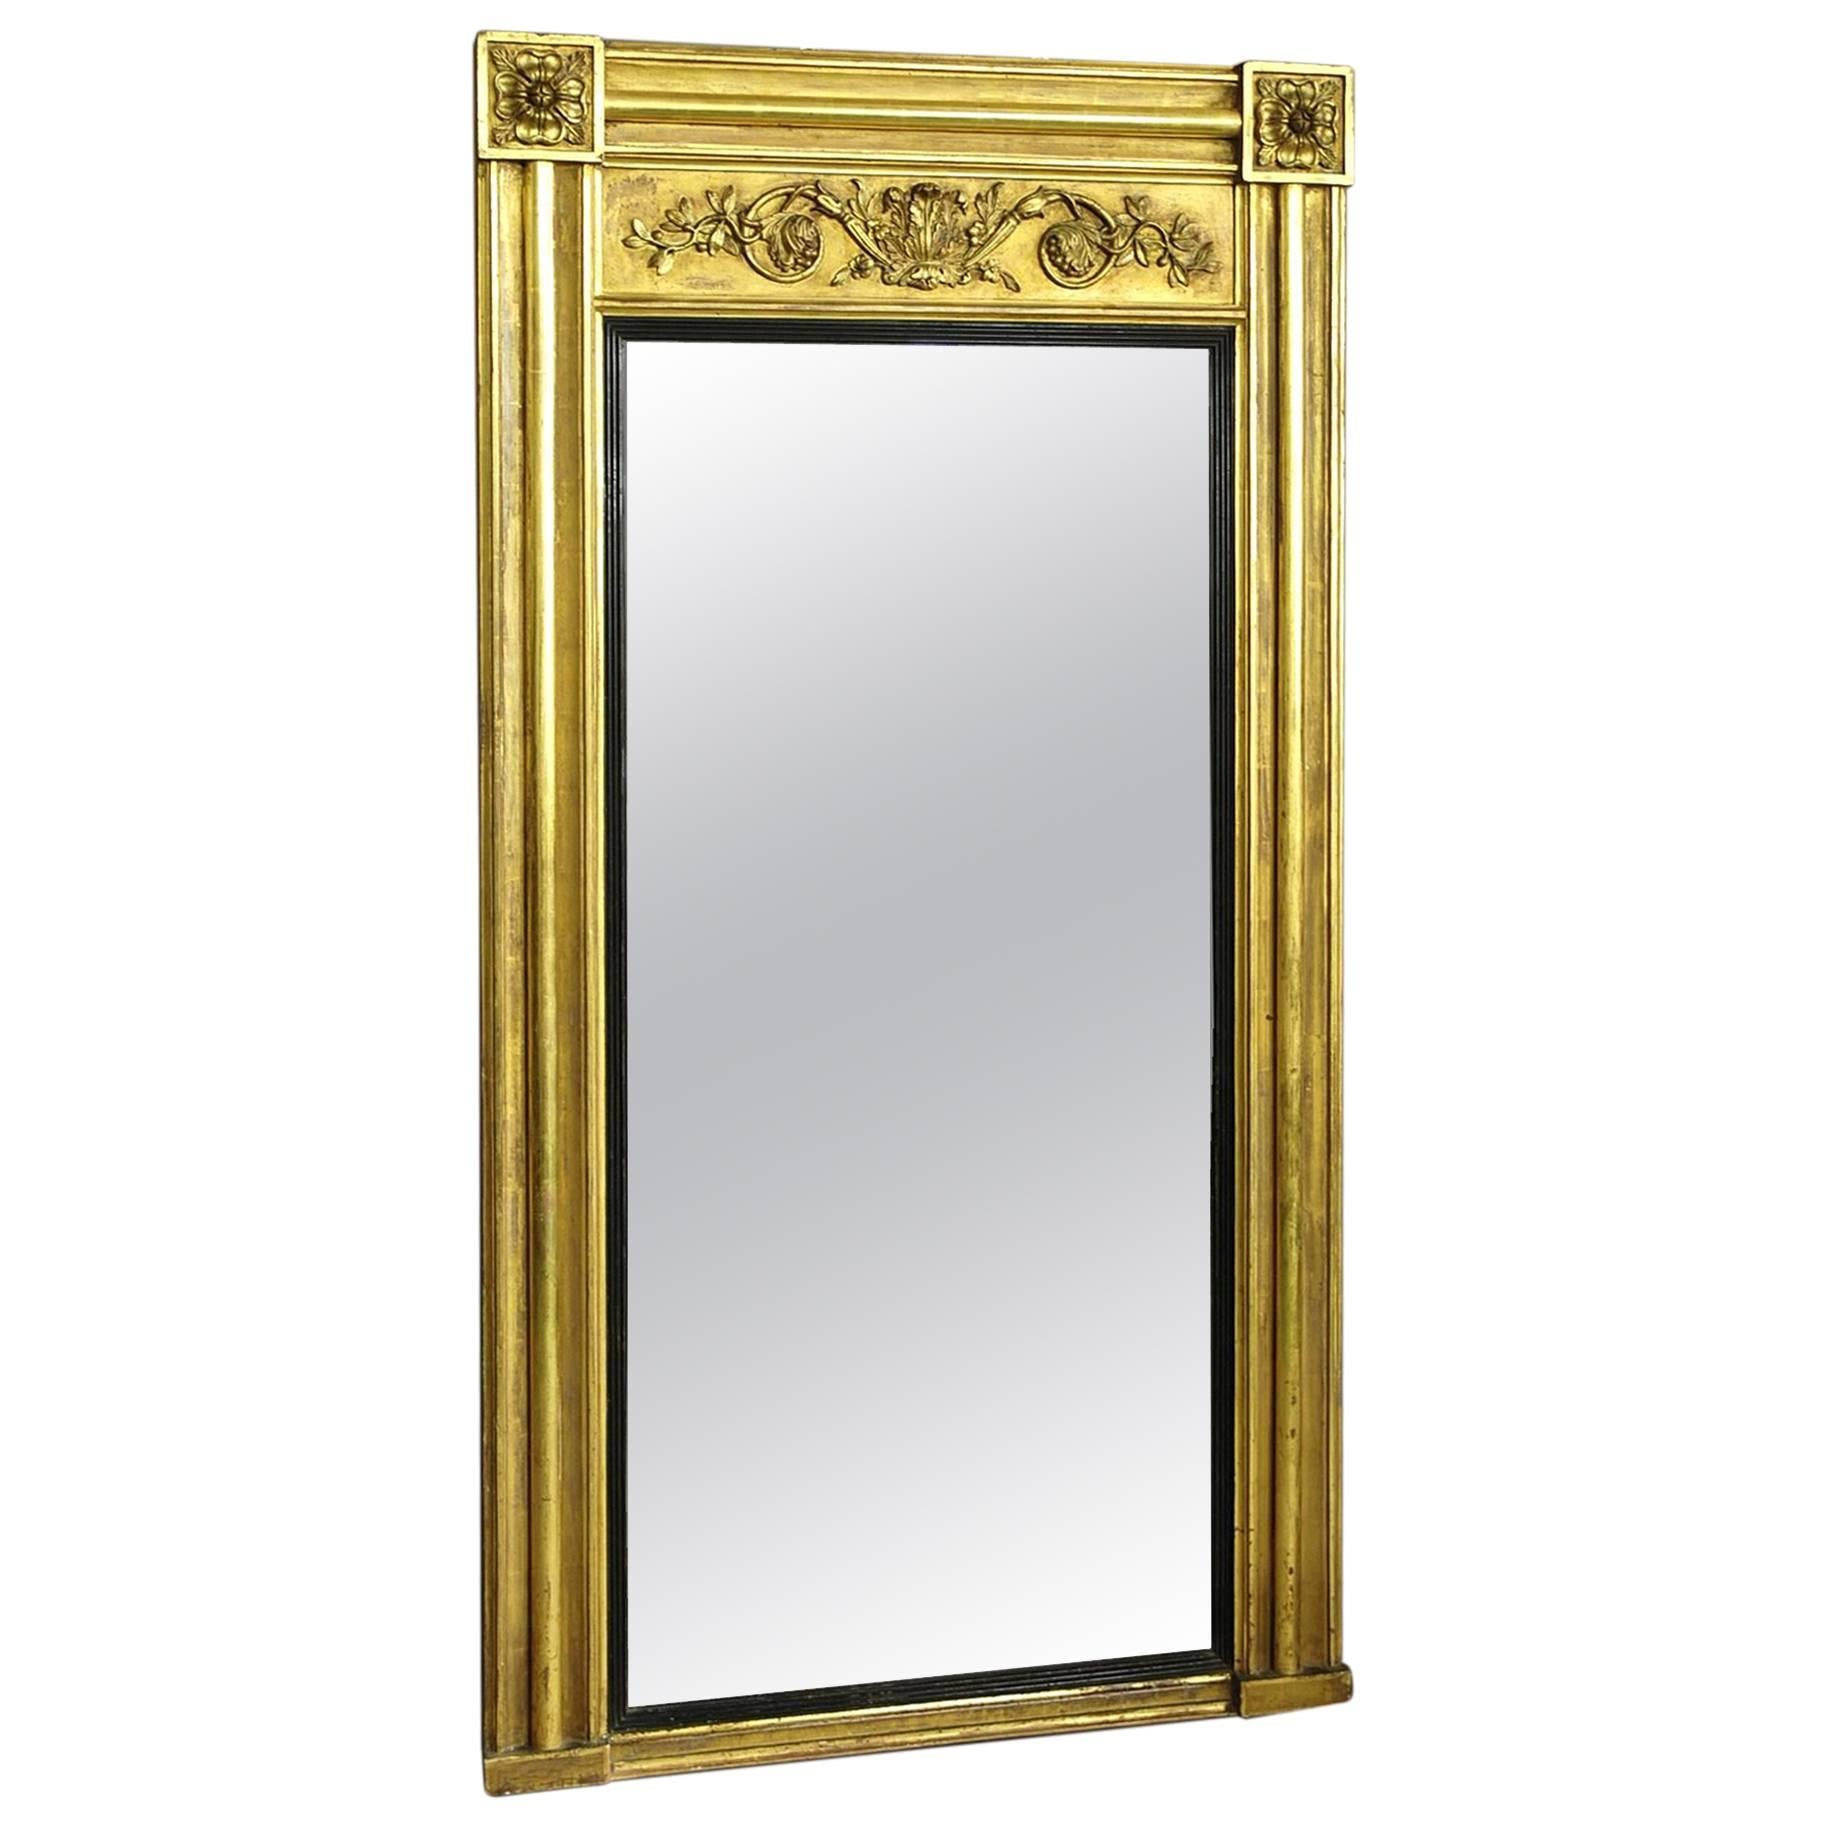 Early 19th Century Regency Gilt Pier Mirror of Large Proportions